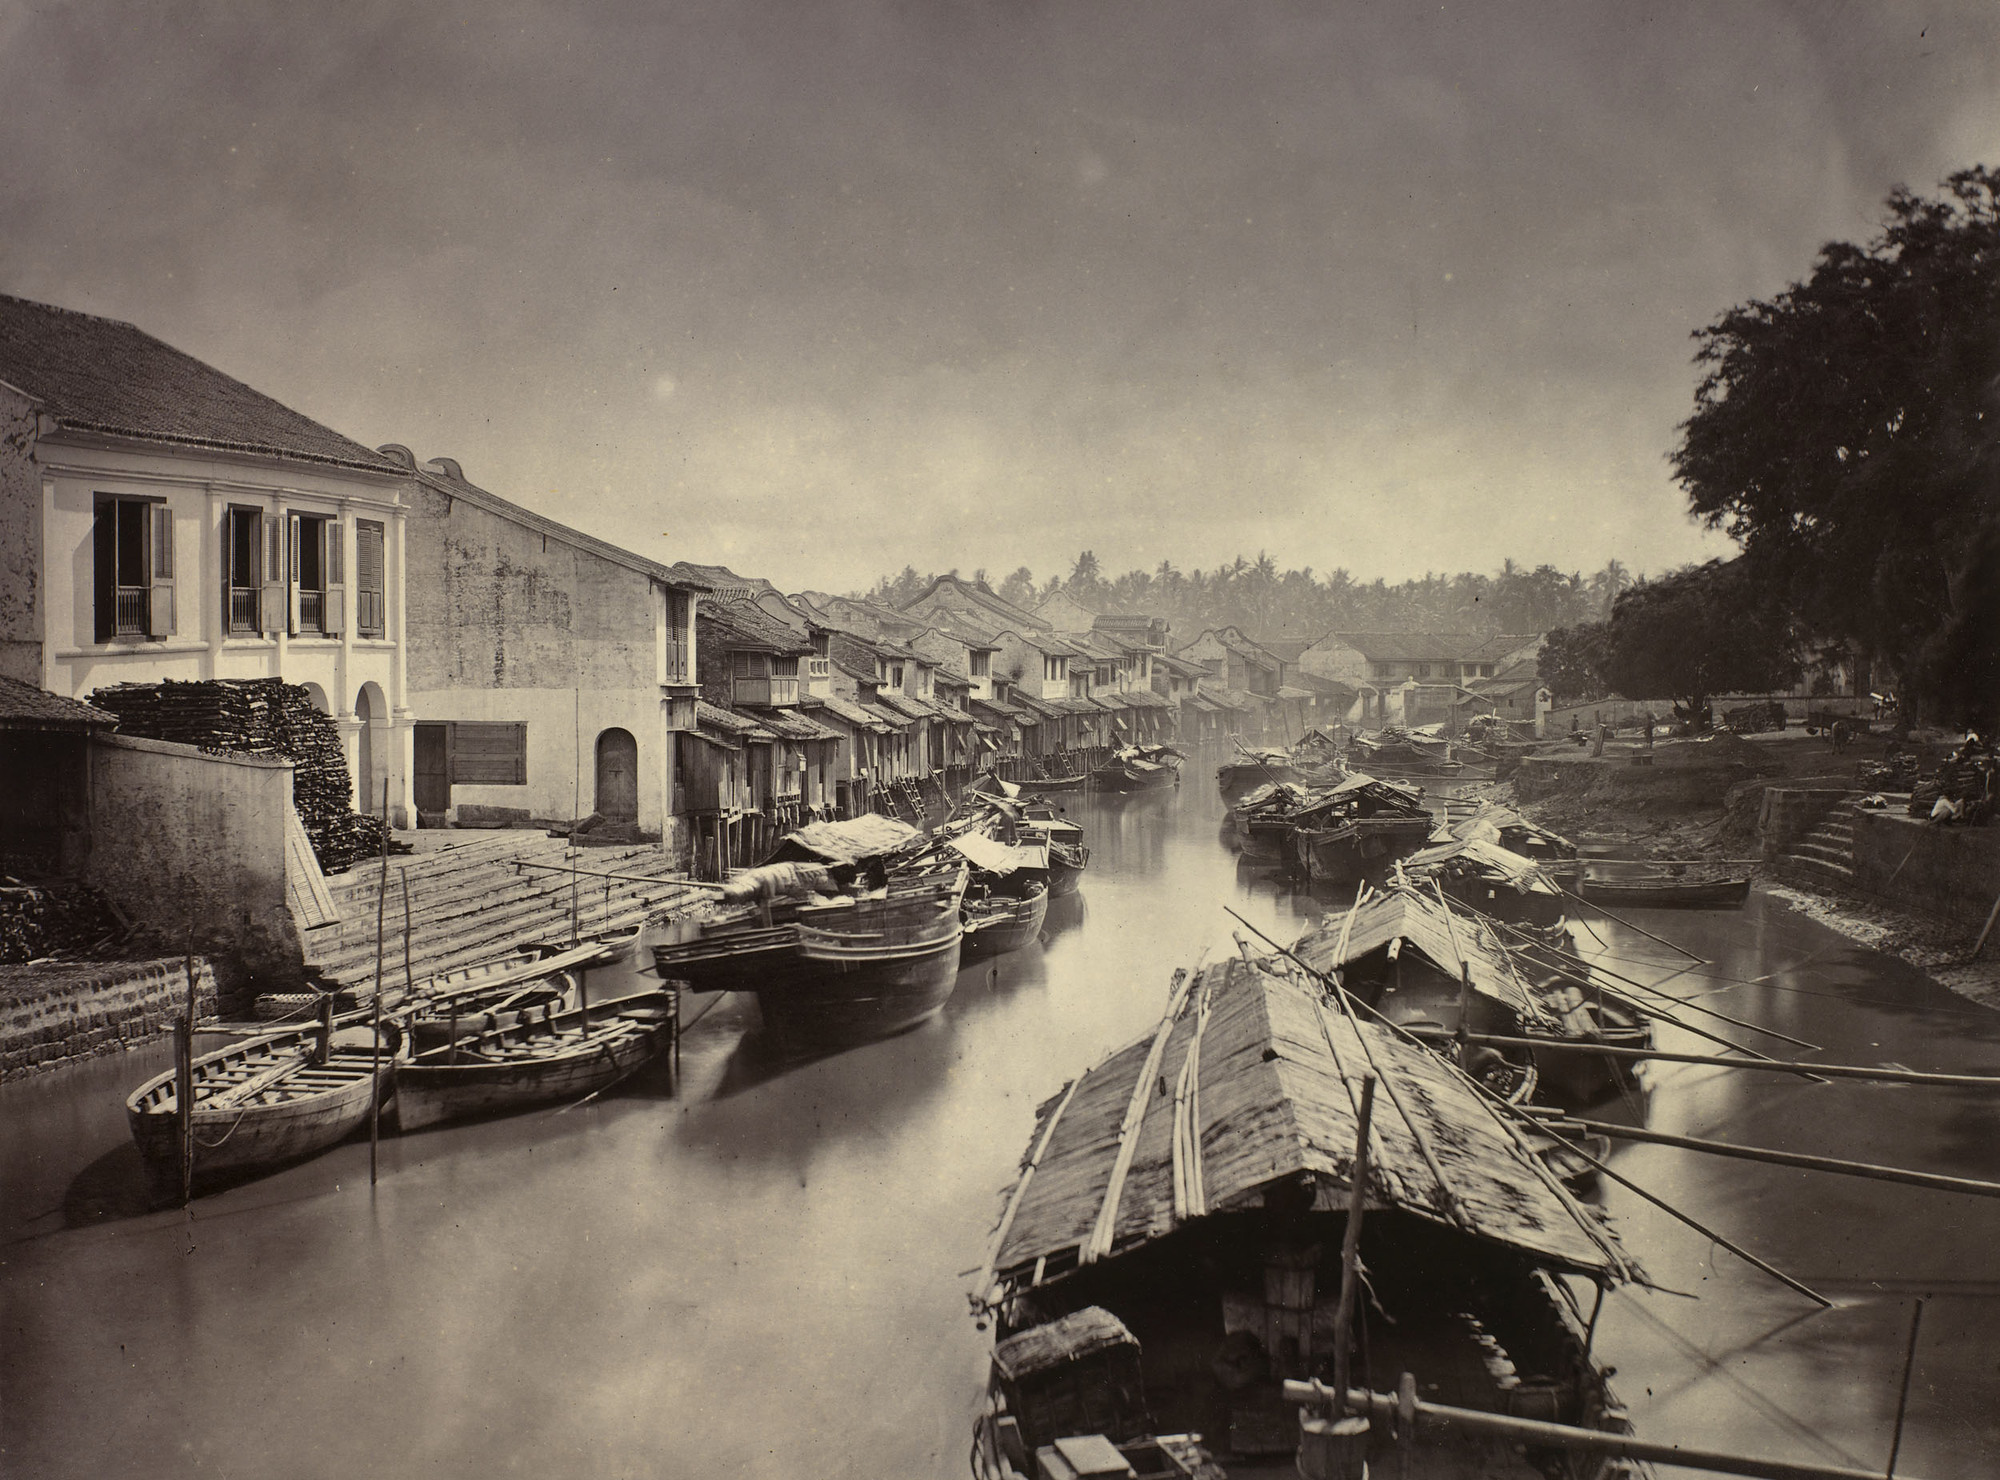 Photograph of a view of the Melacca river, Malaysia. There are a large number of boats on the river, a selection with cabins and thatched roofs. On the left side of the river are a series of buildings, many of which are on stilts. Groups of people are sea